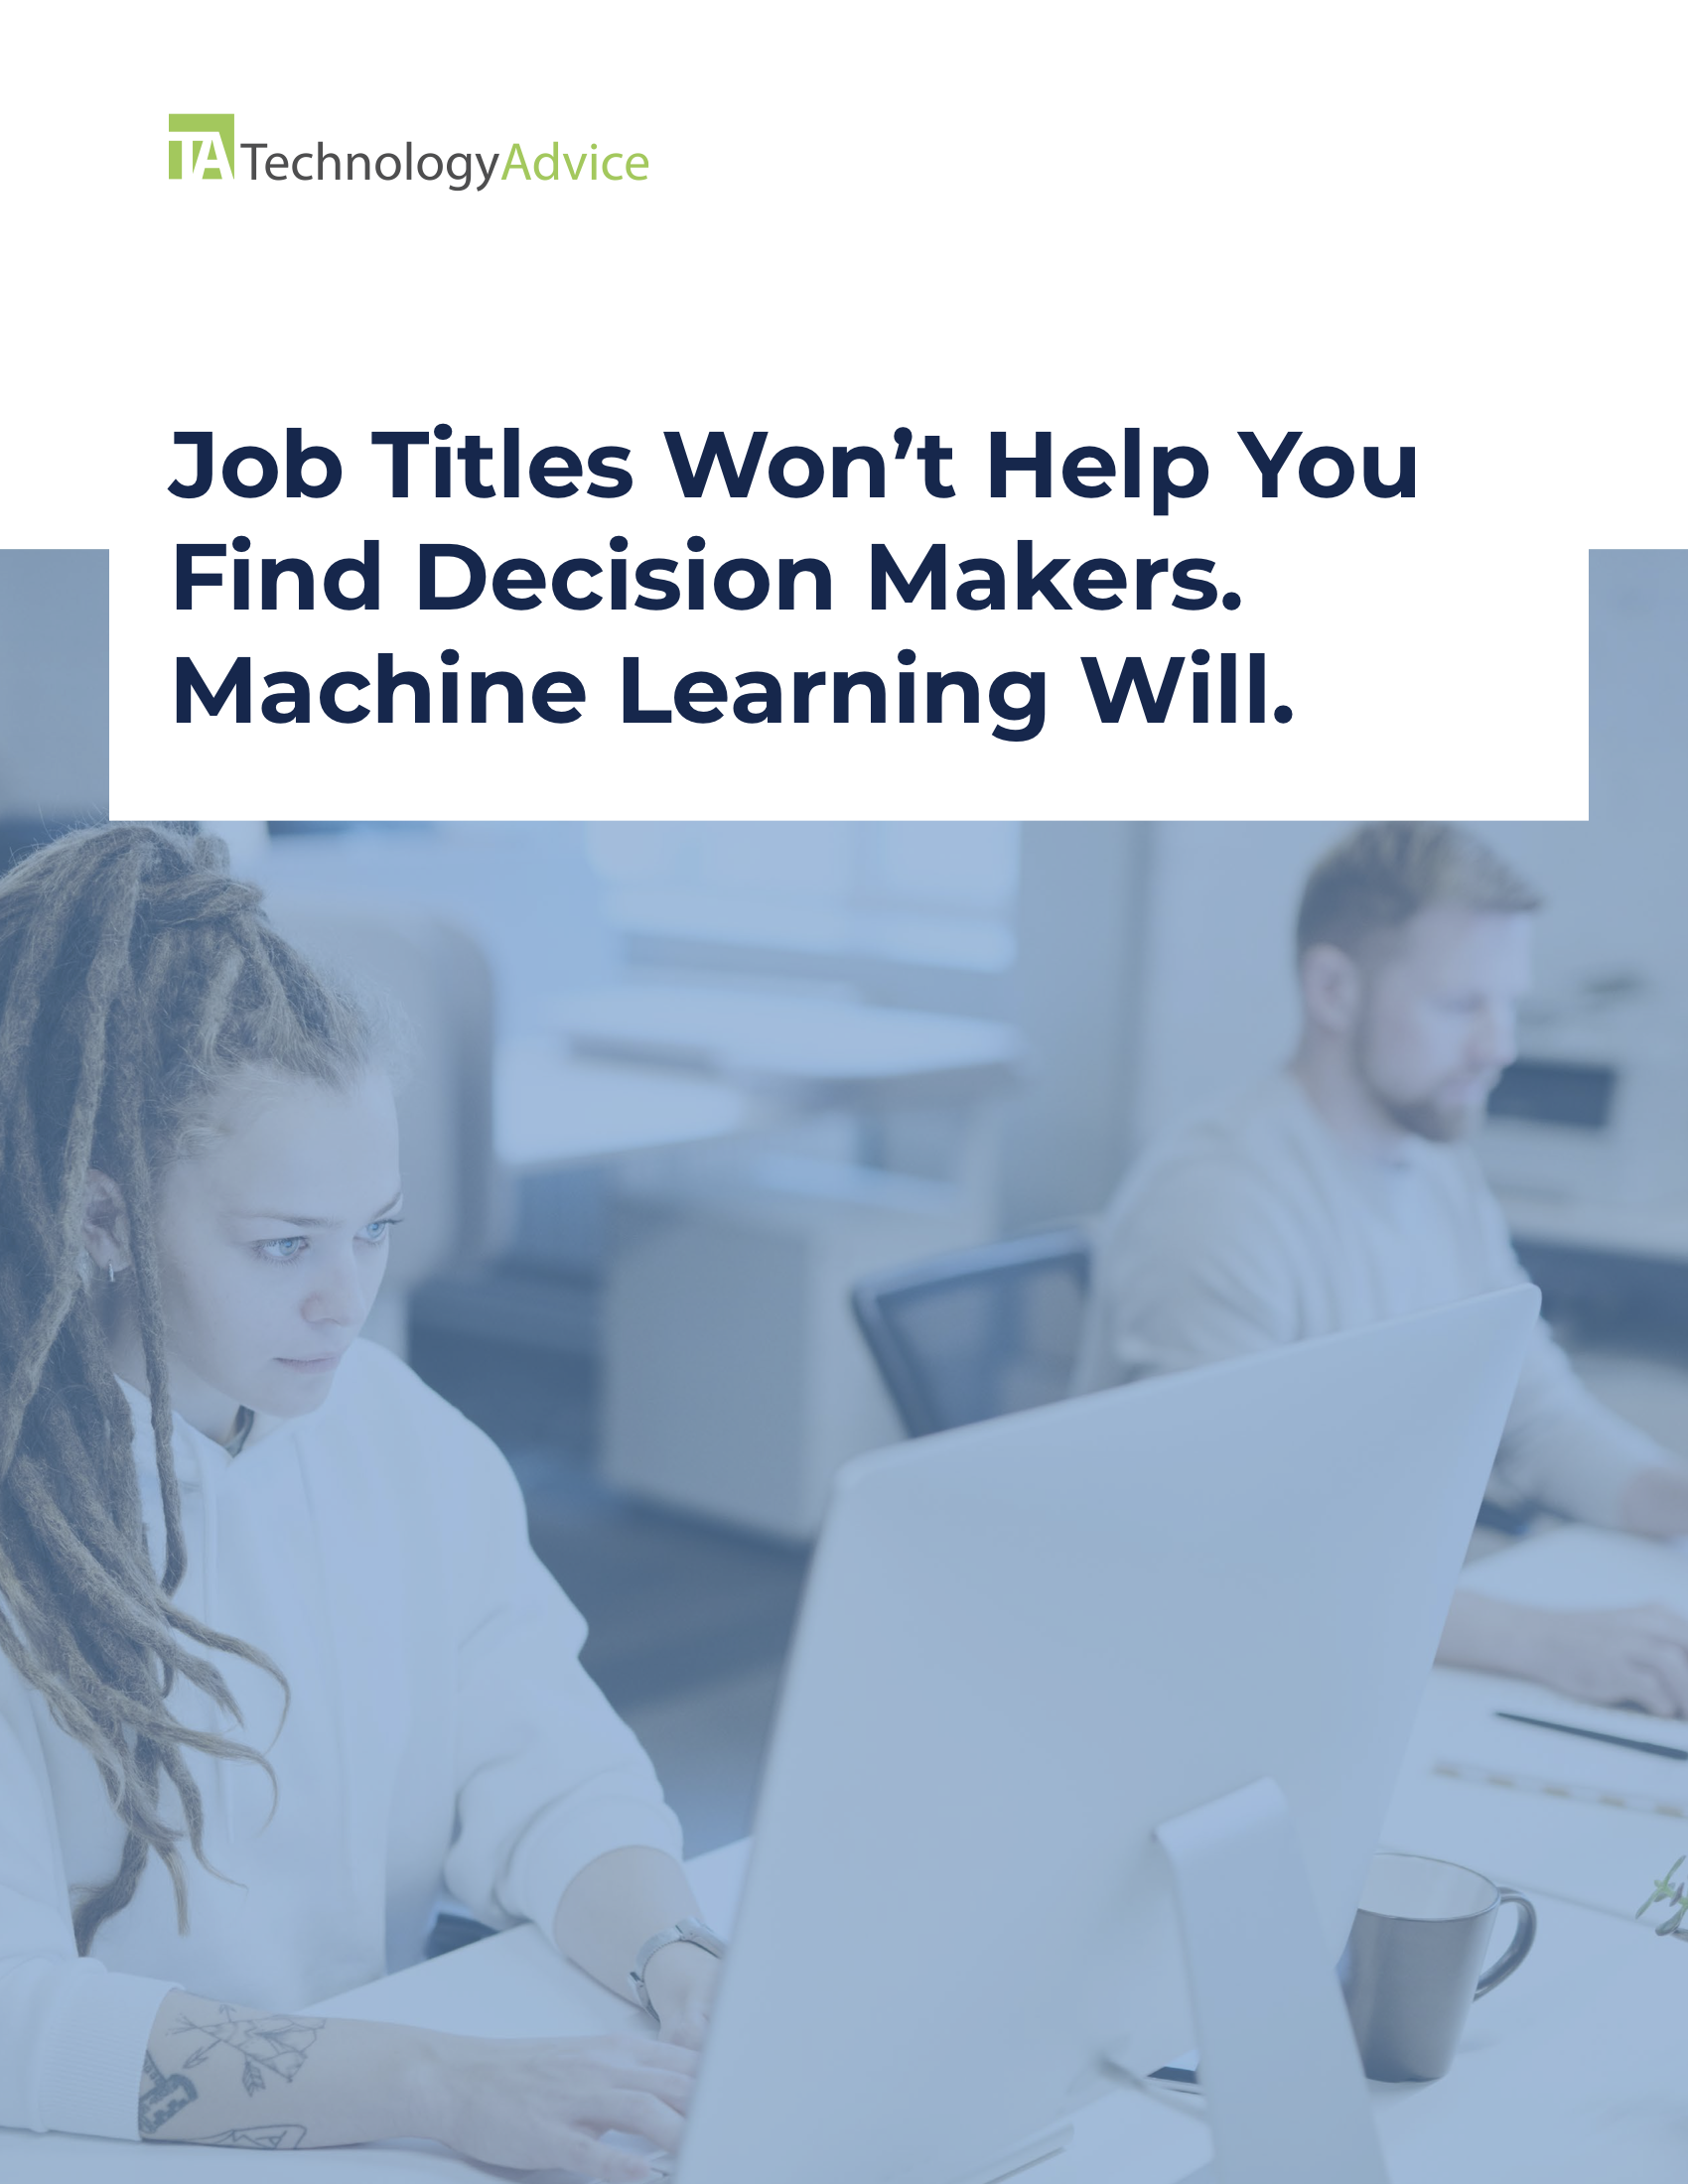 Job Titles Won't Help You Find Decision Makers. Machine Learning Will.